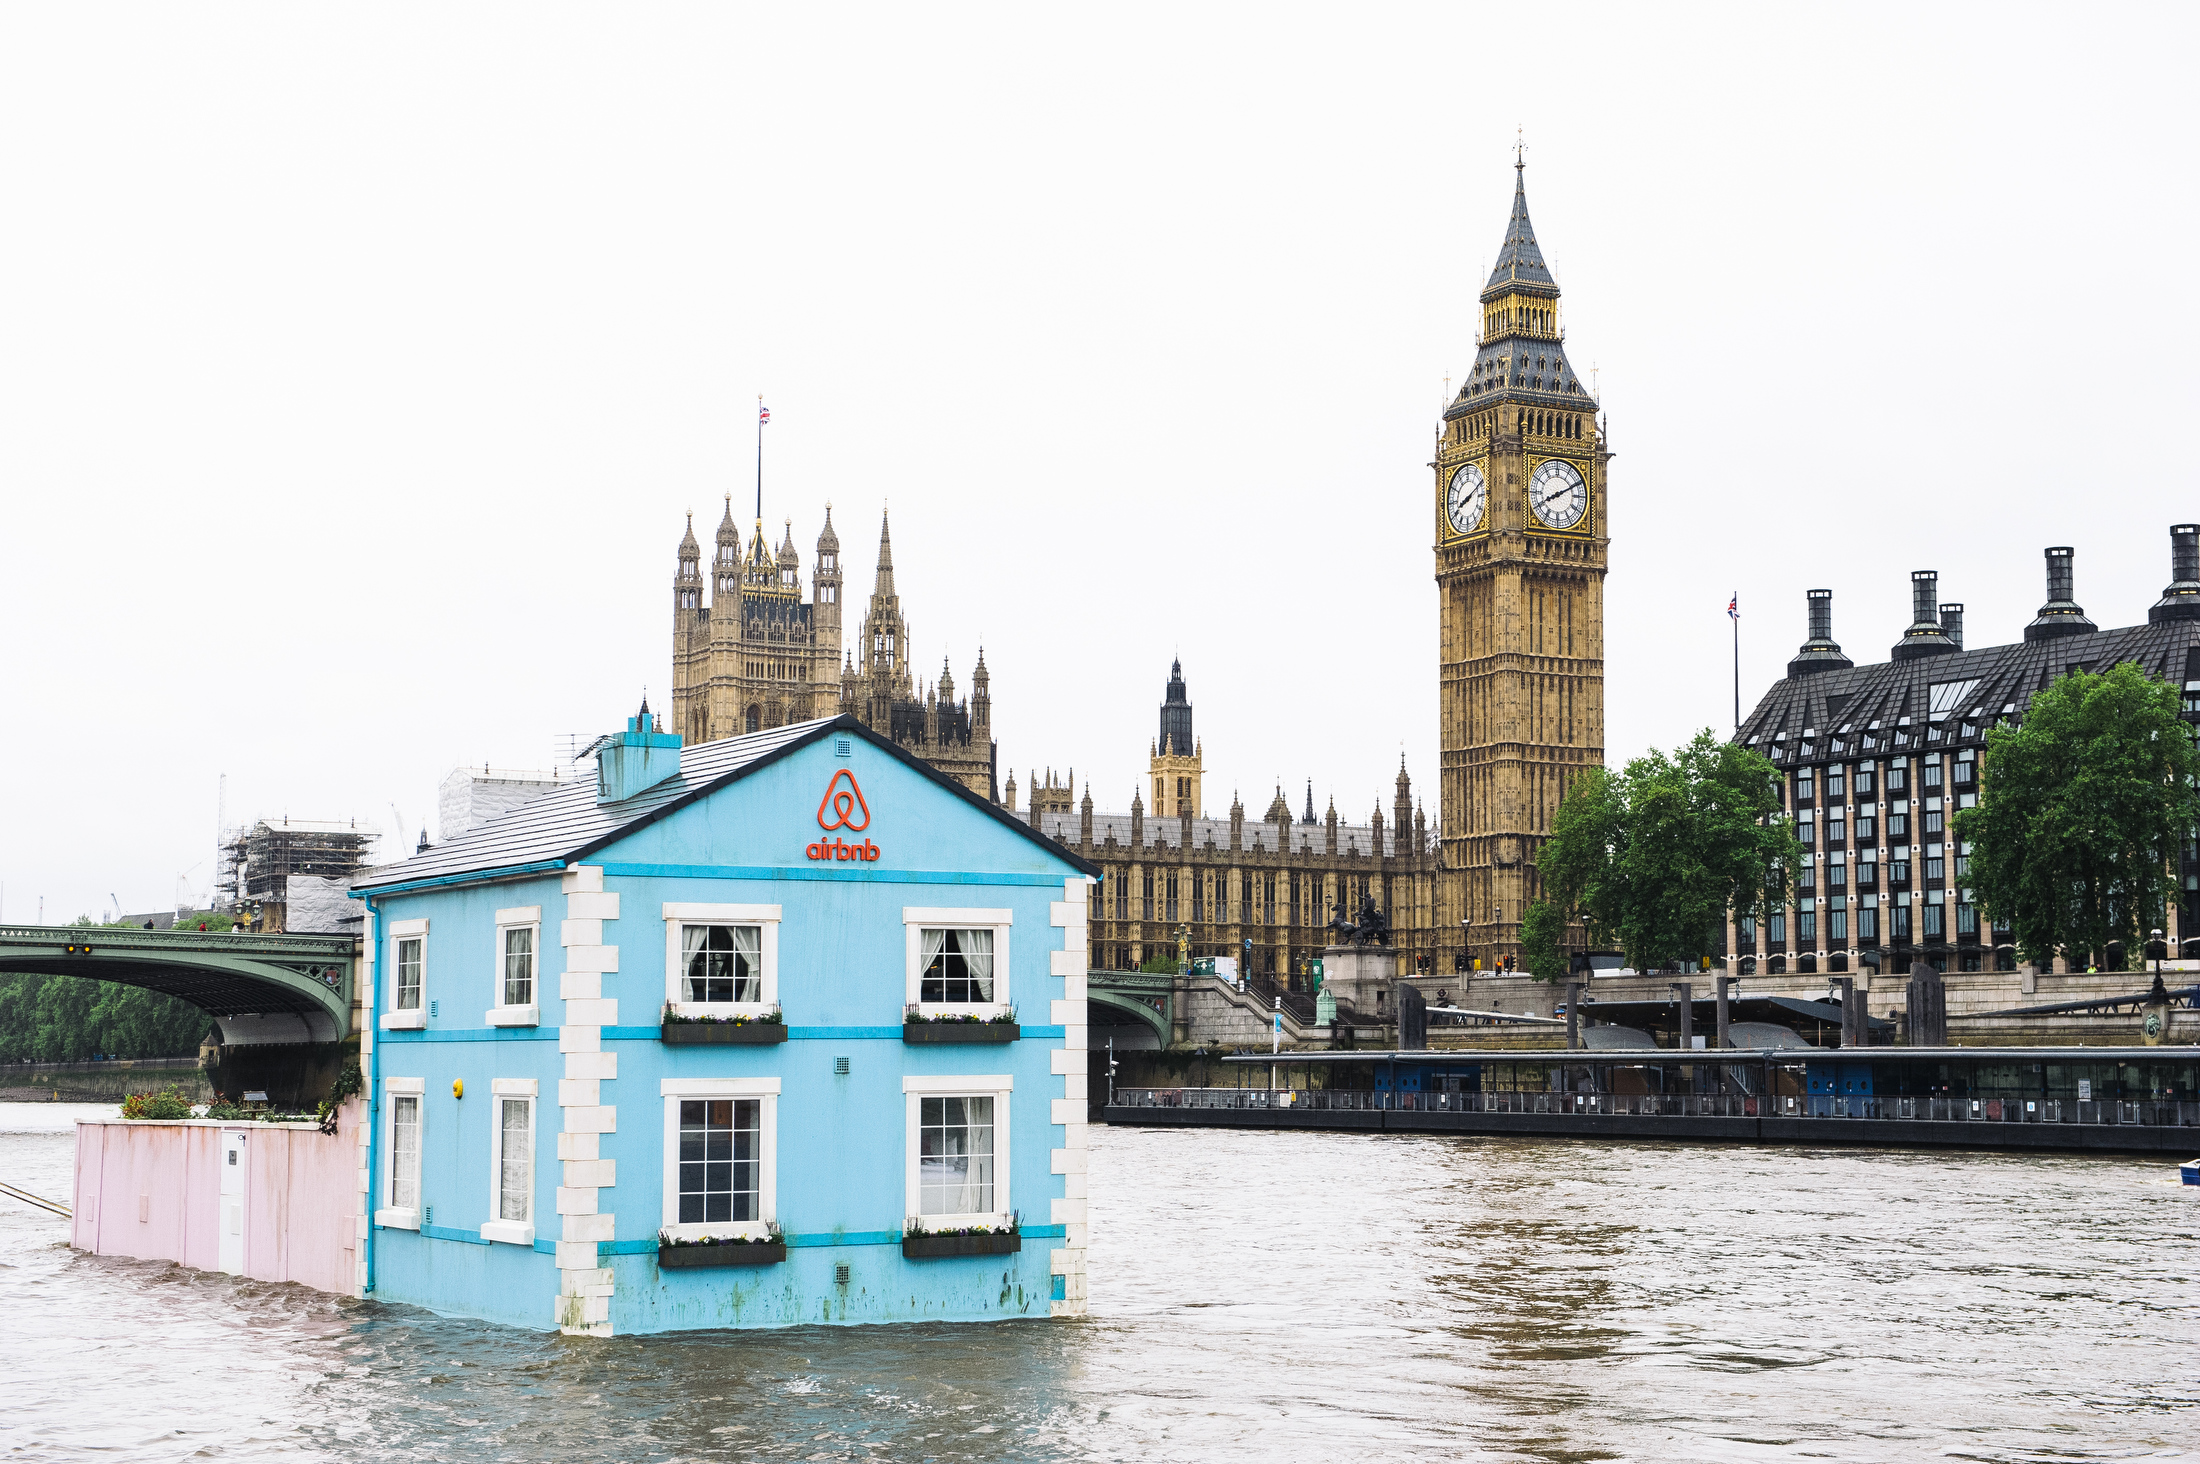 Airbnb's latest London listing is pictured floating down the River Thames, past the Houses of Parliament. (Mikael Buck / Airbnb)